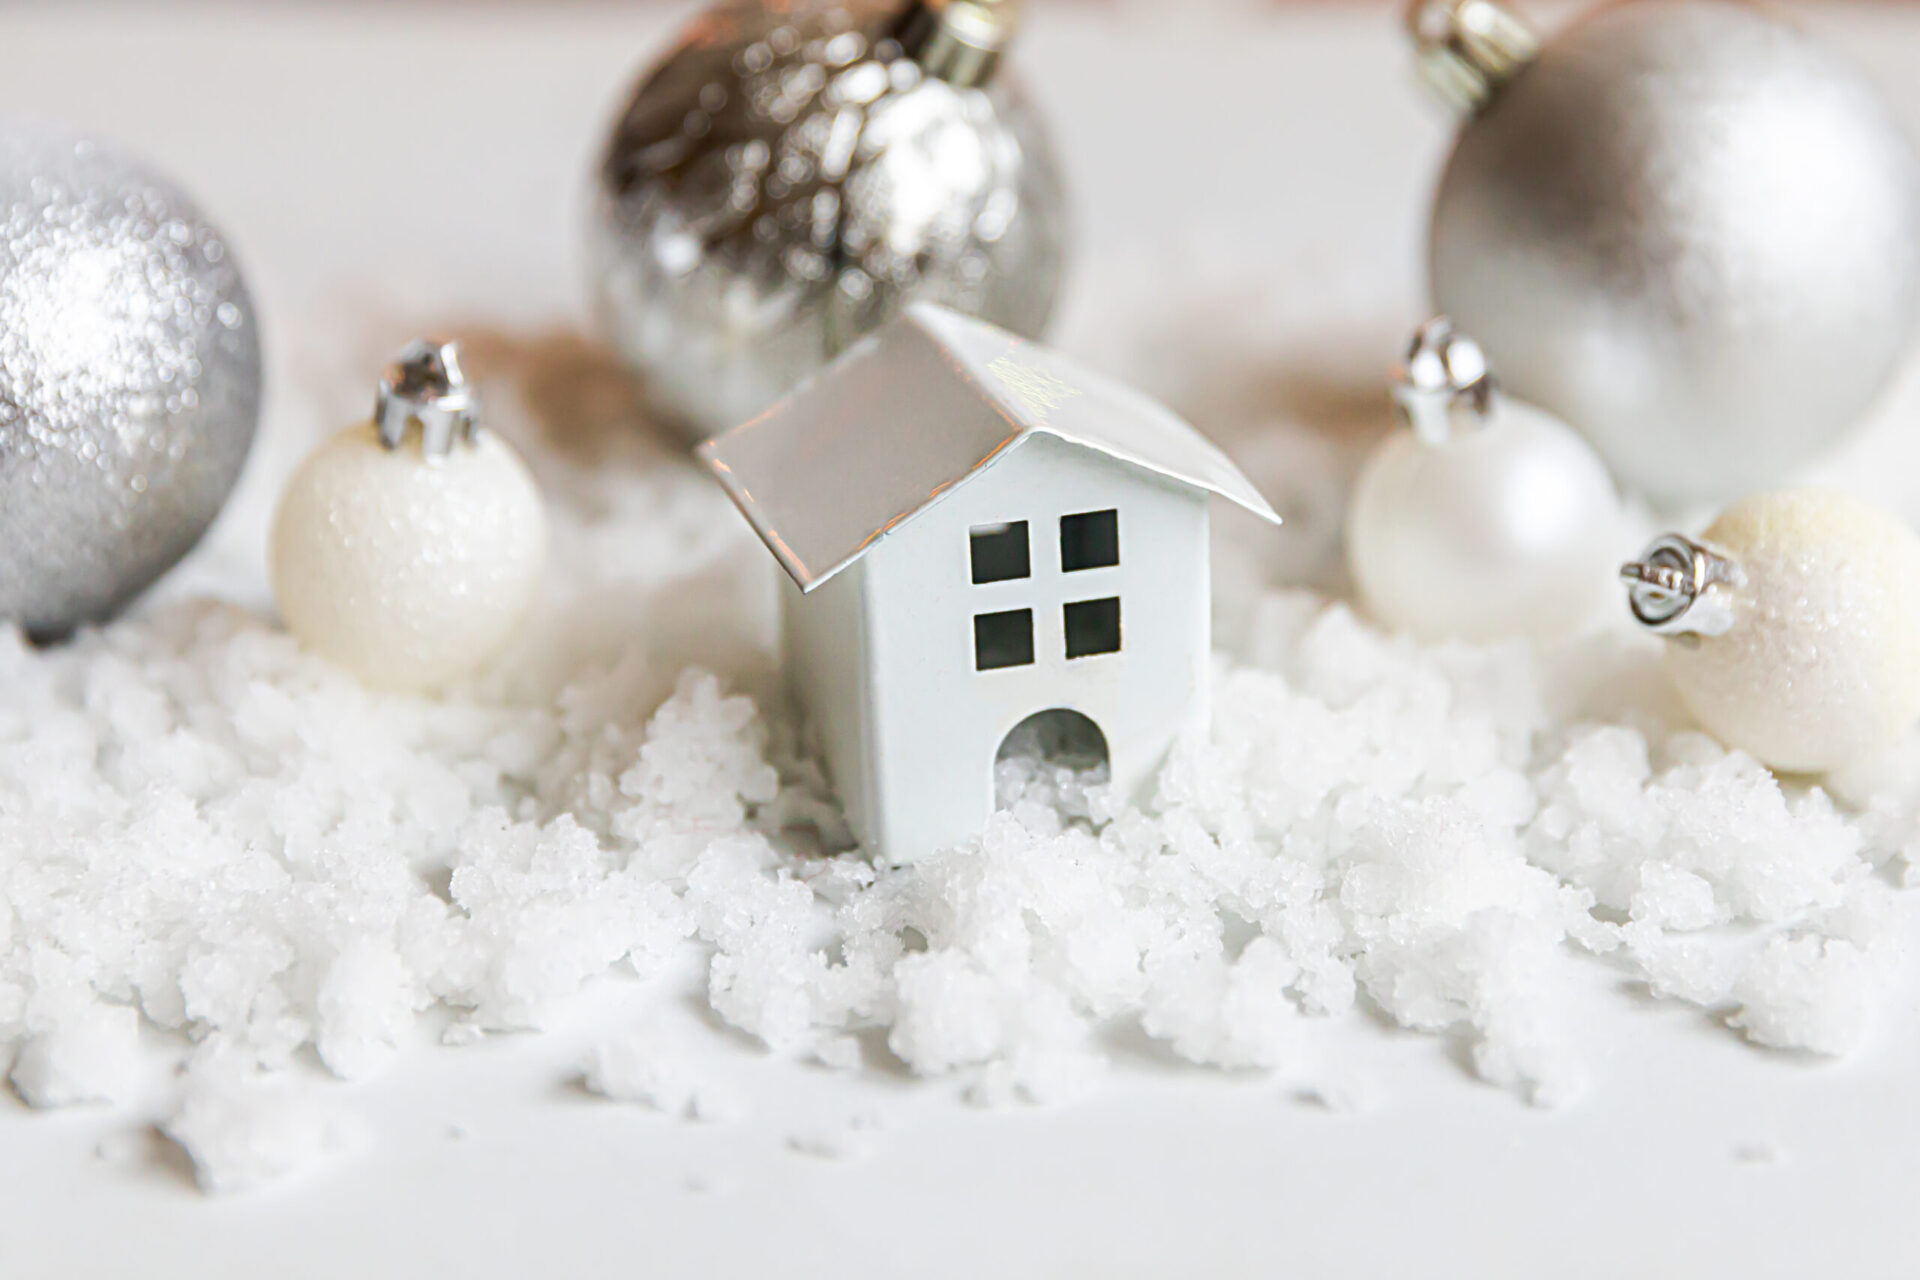 Americans Looking For Homes With White Christmases May Have To Pay A Premium